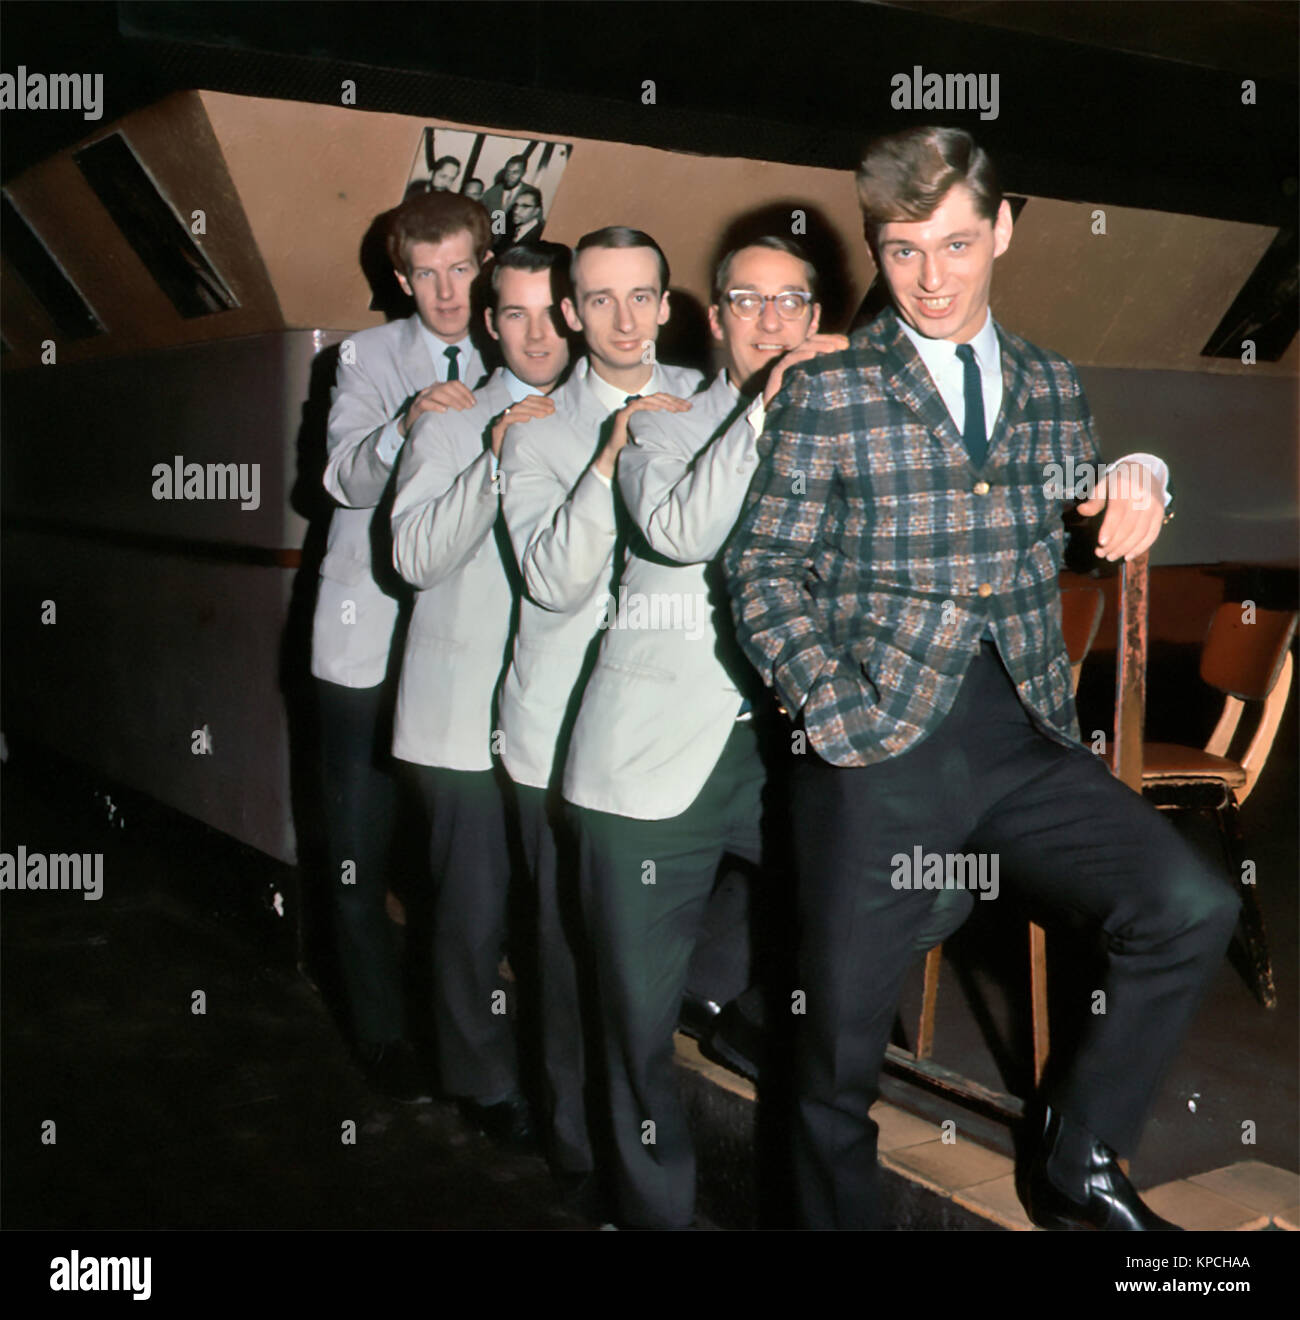 Georgie Fame And The Blue Flames Uk Group At The Flamingo Club Oxford Street London In 1964 Photo Tony Gale Stock Photo Alamy